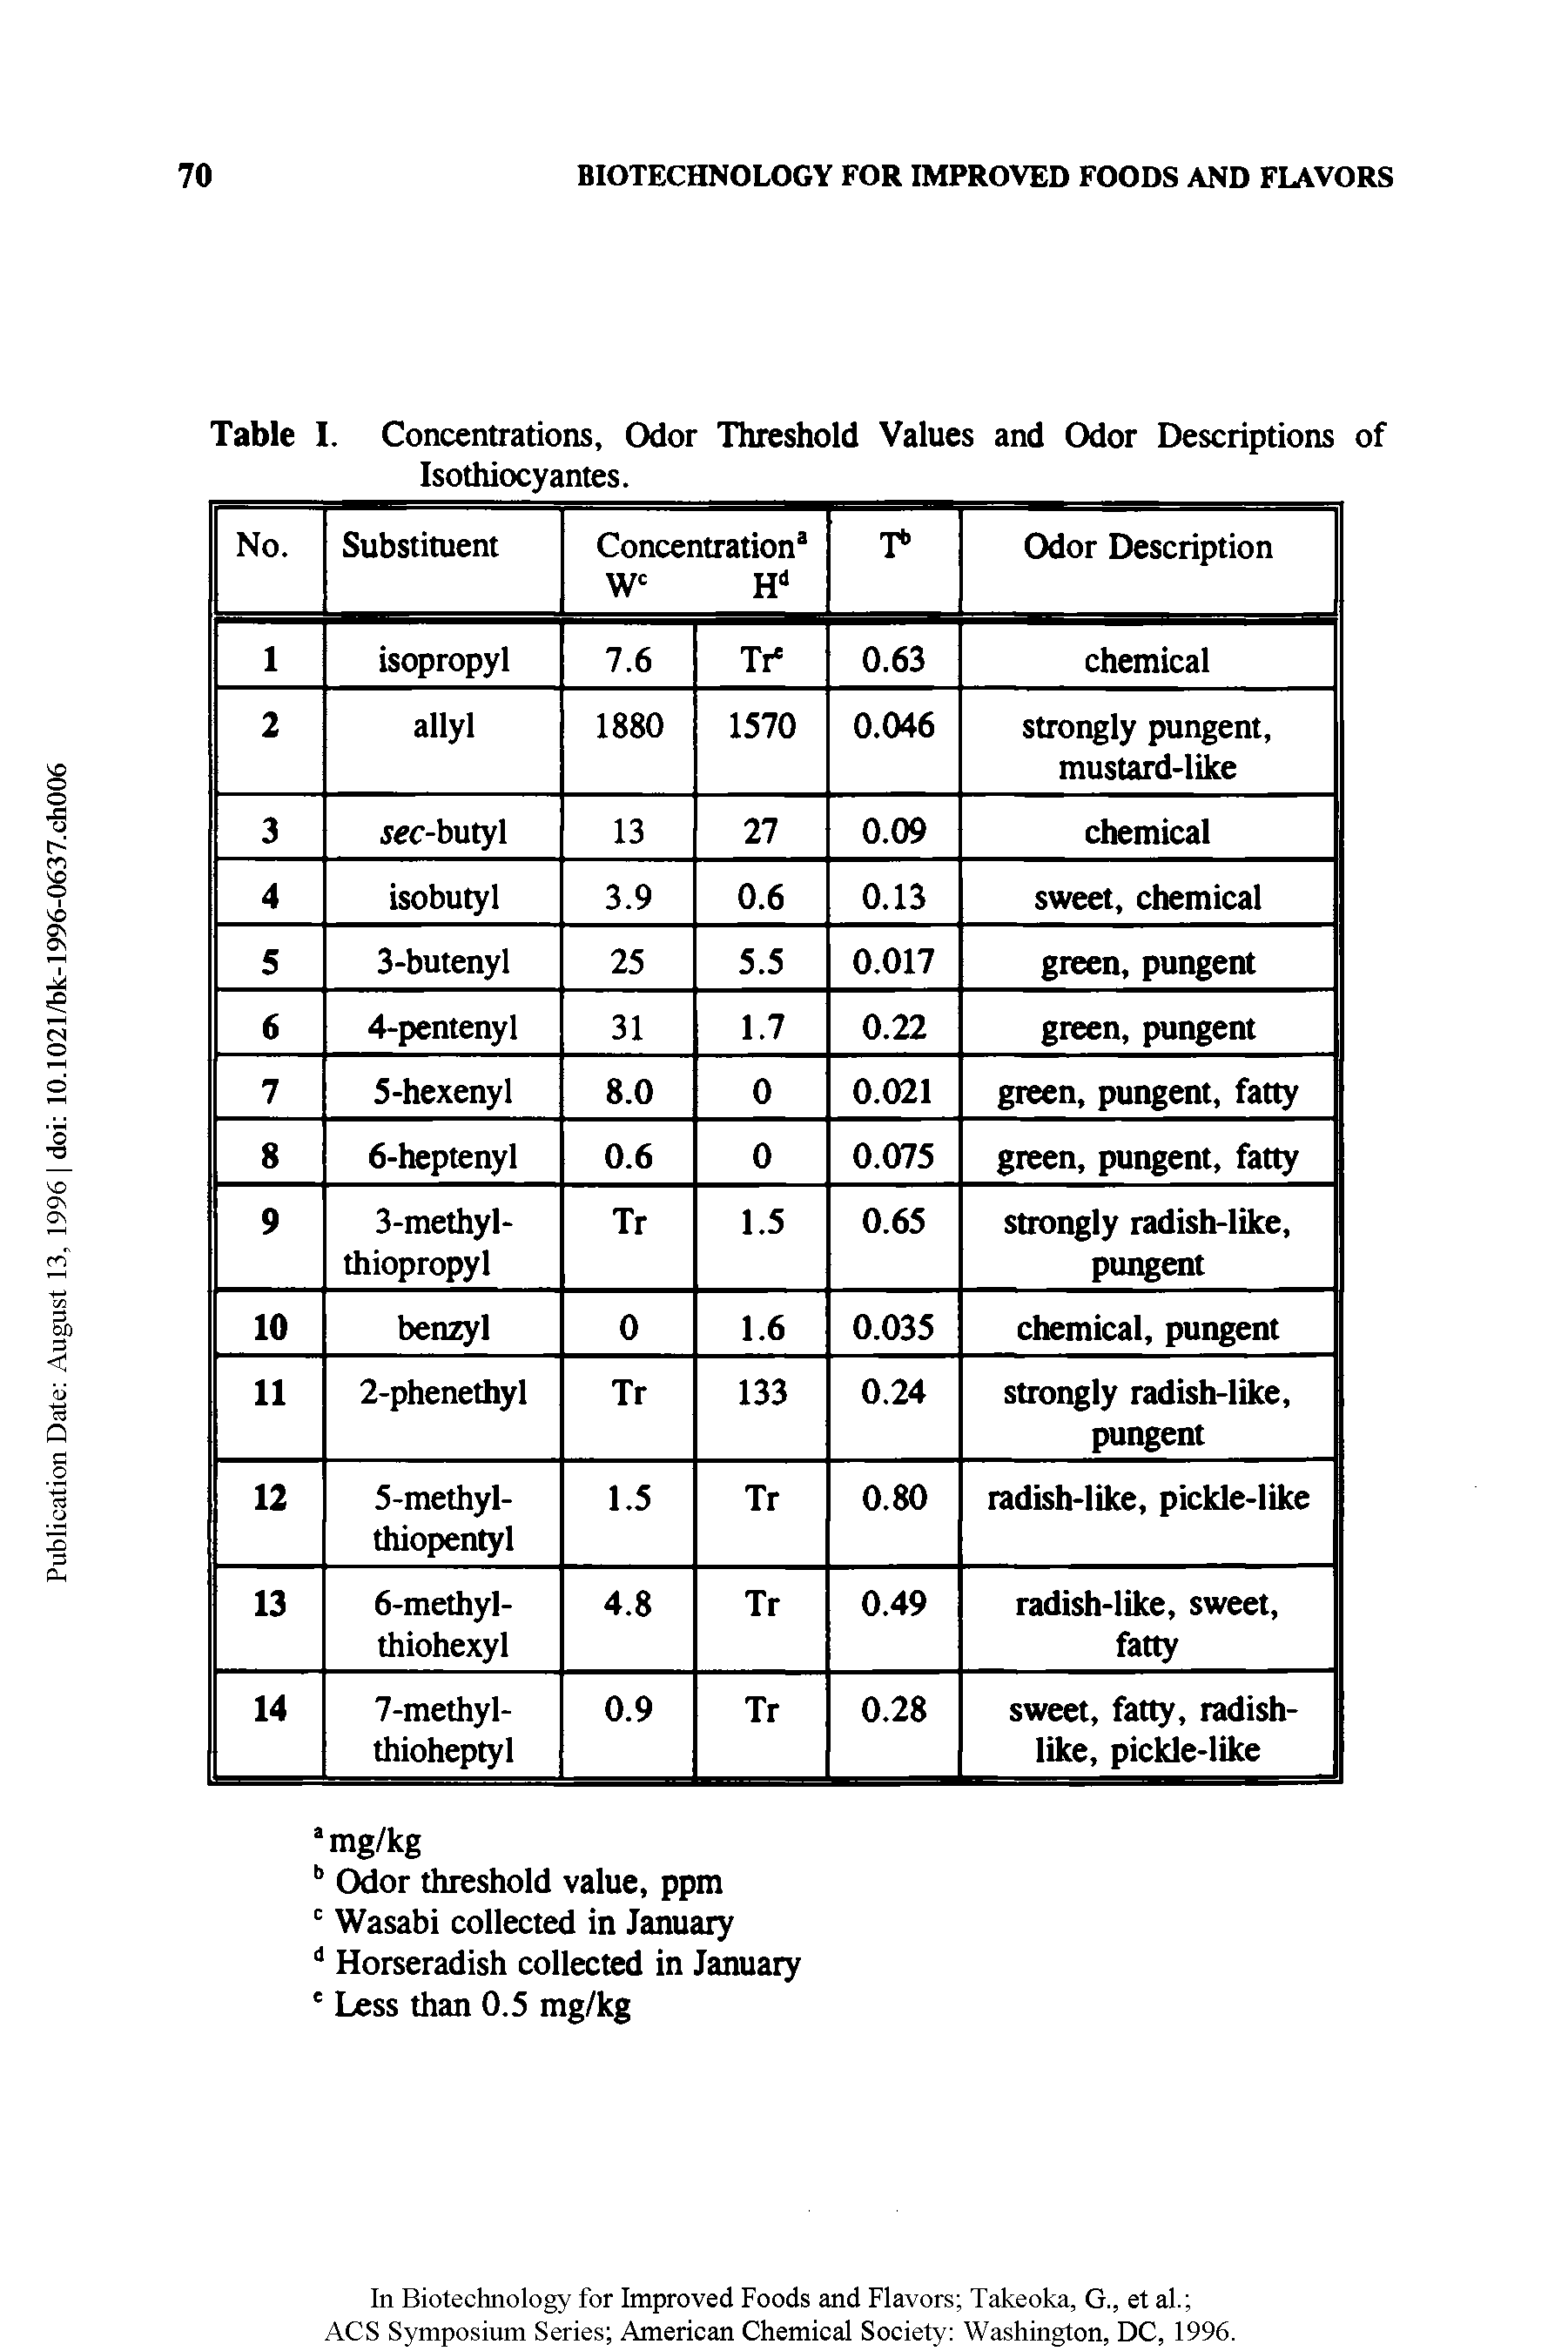 Table I. Concentrations, Odor Threshold Values Isothiocy antes.